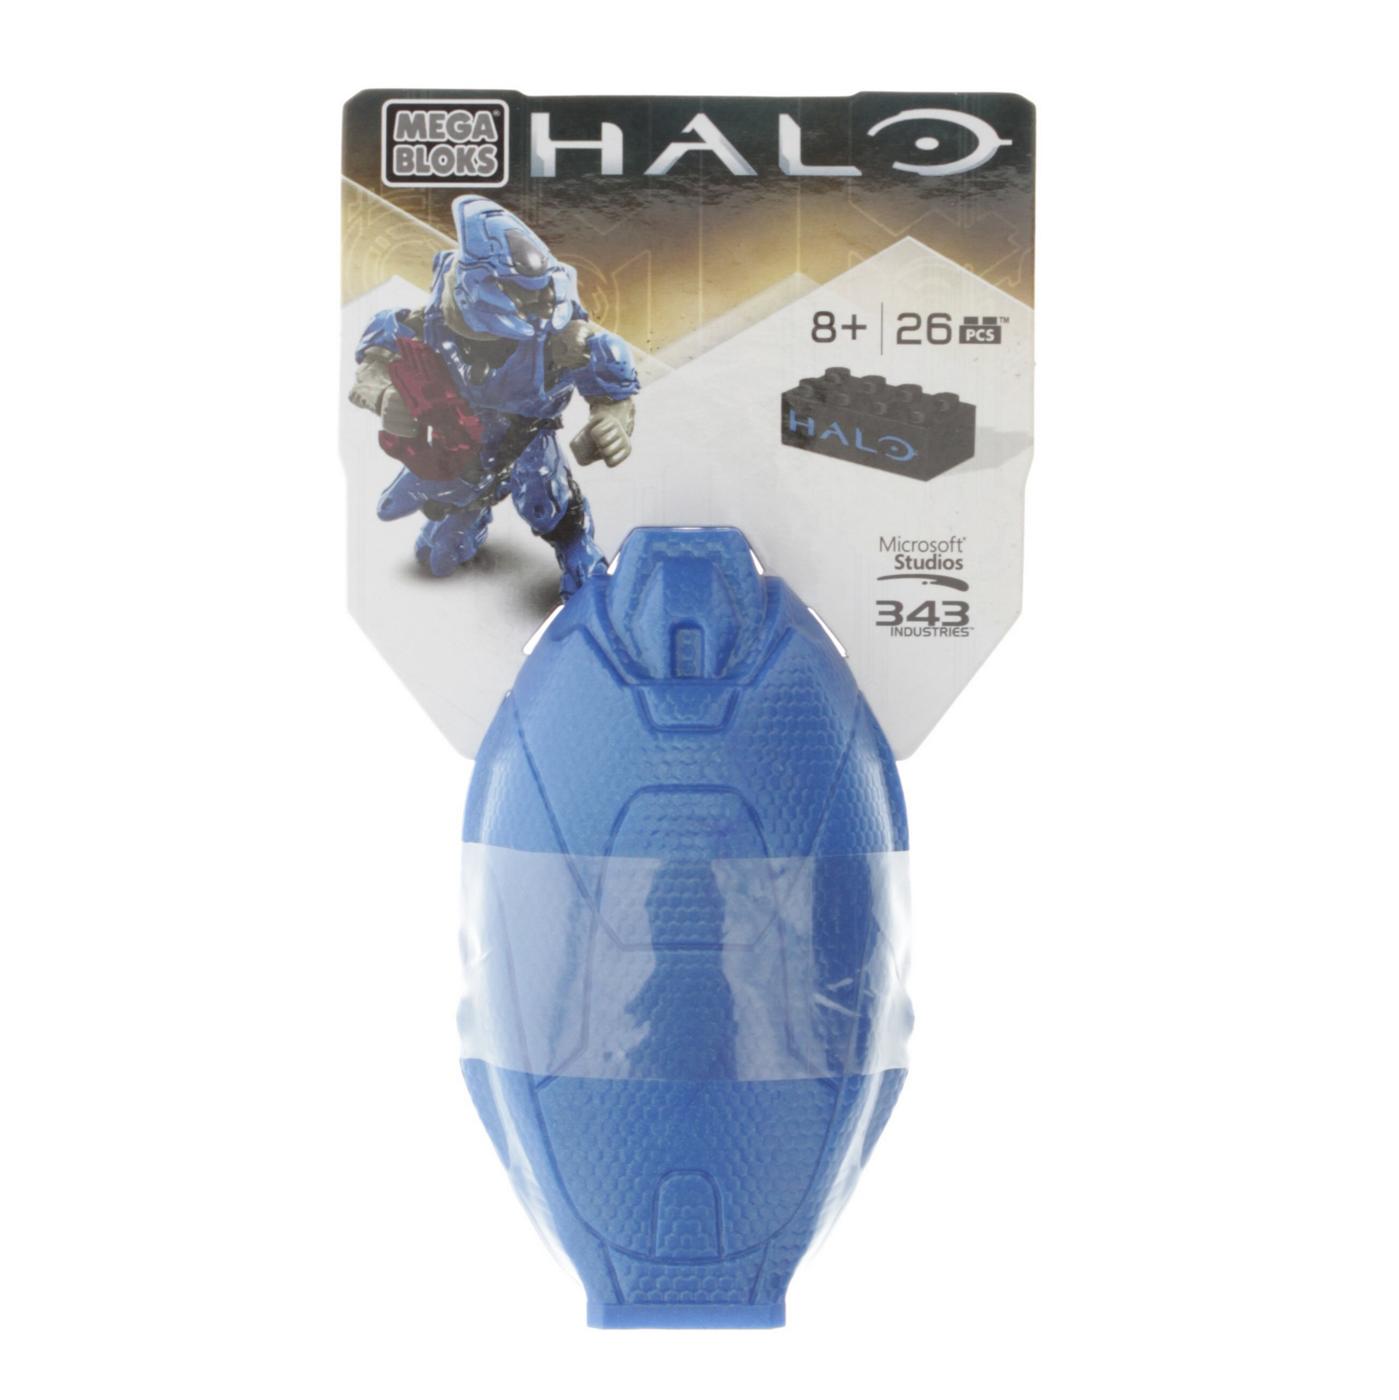 Mega Bloks Halo Metallic Series ODST Drop Pods, Assorted Characters; image 3 of 4